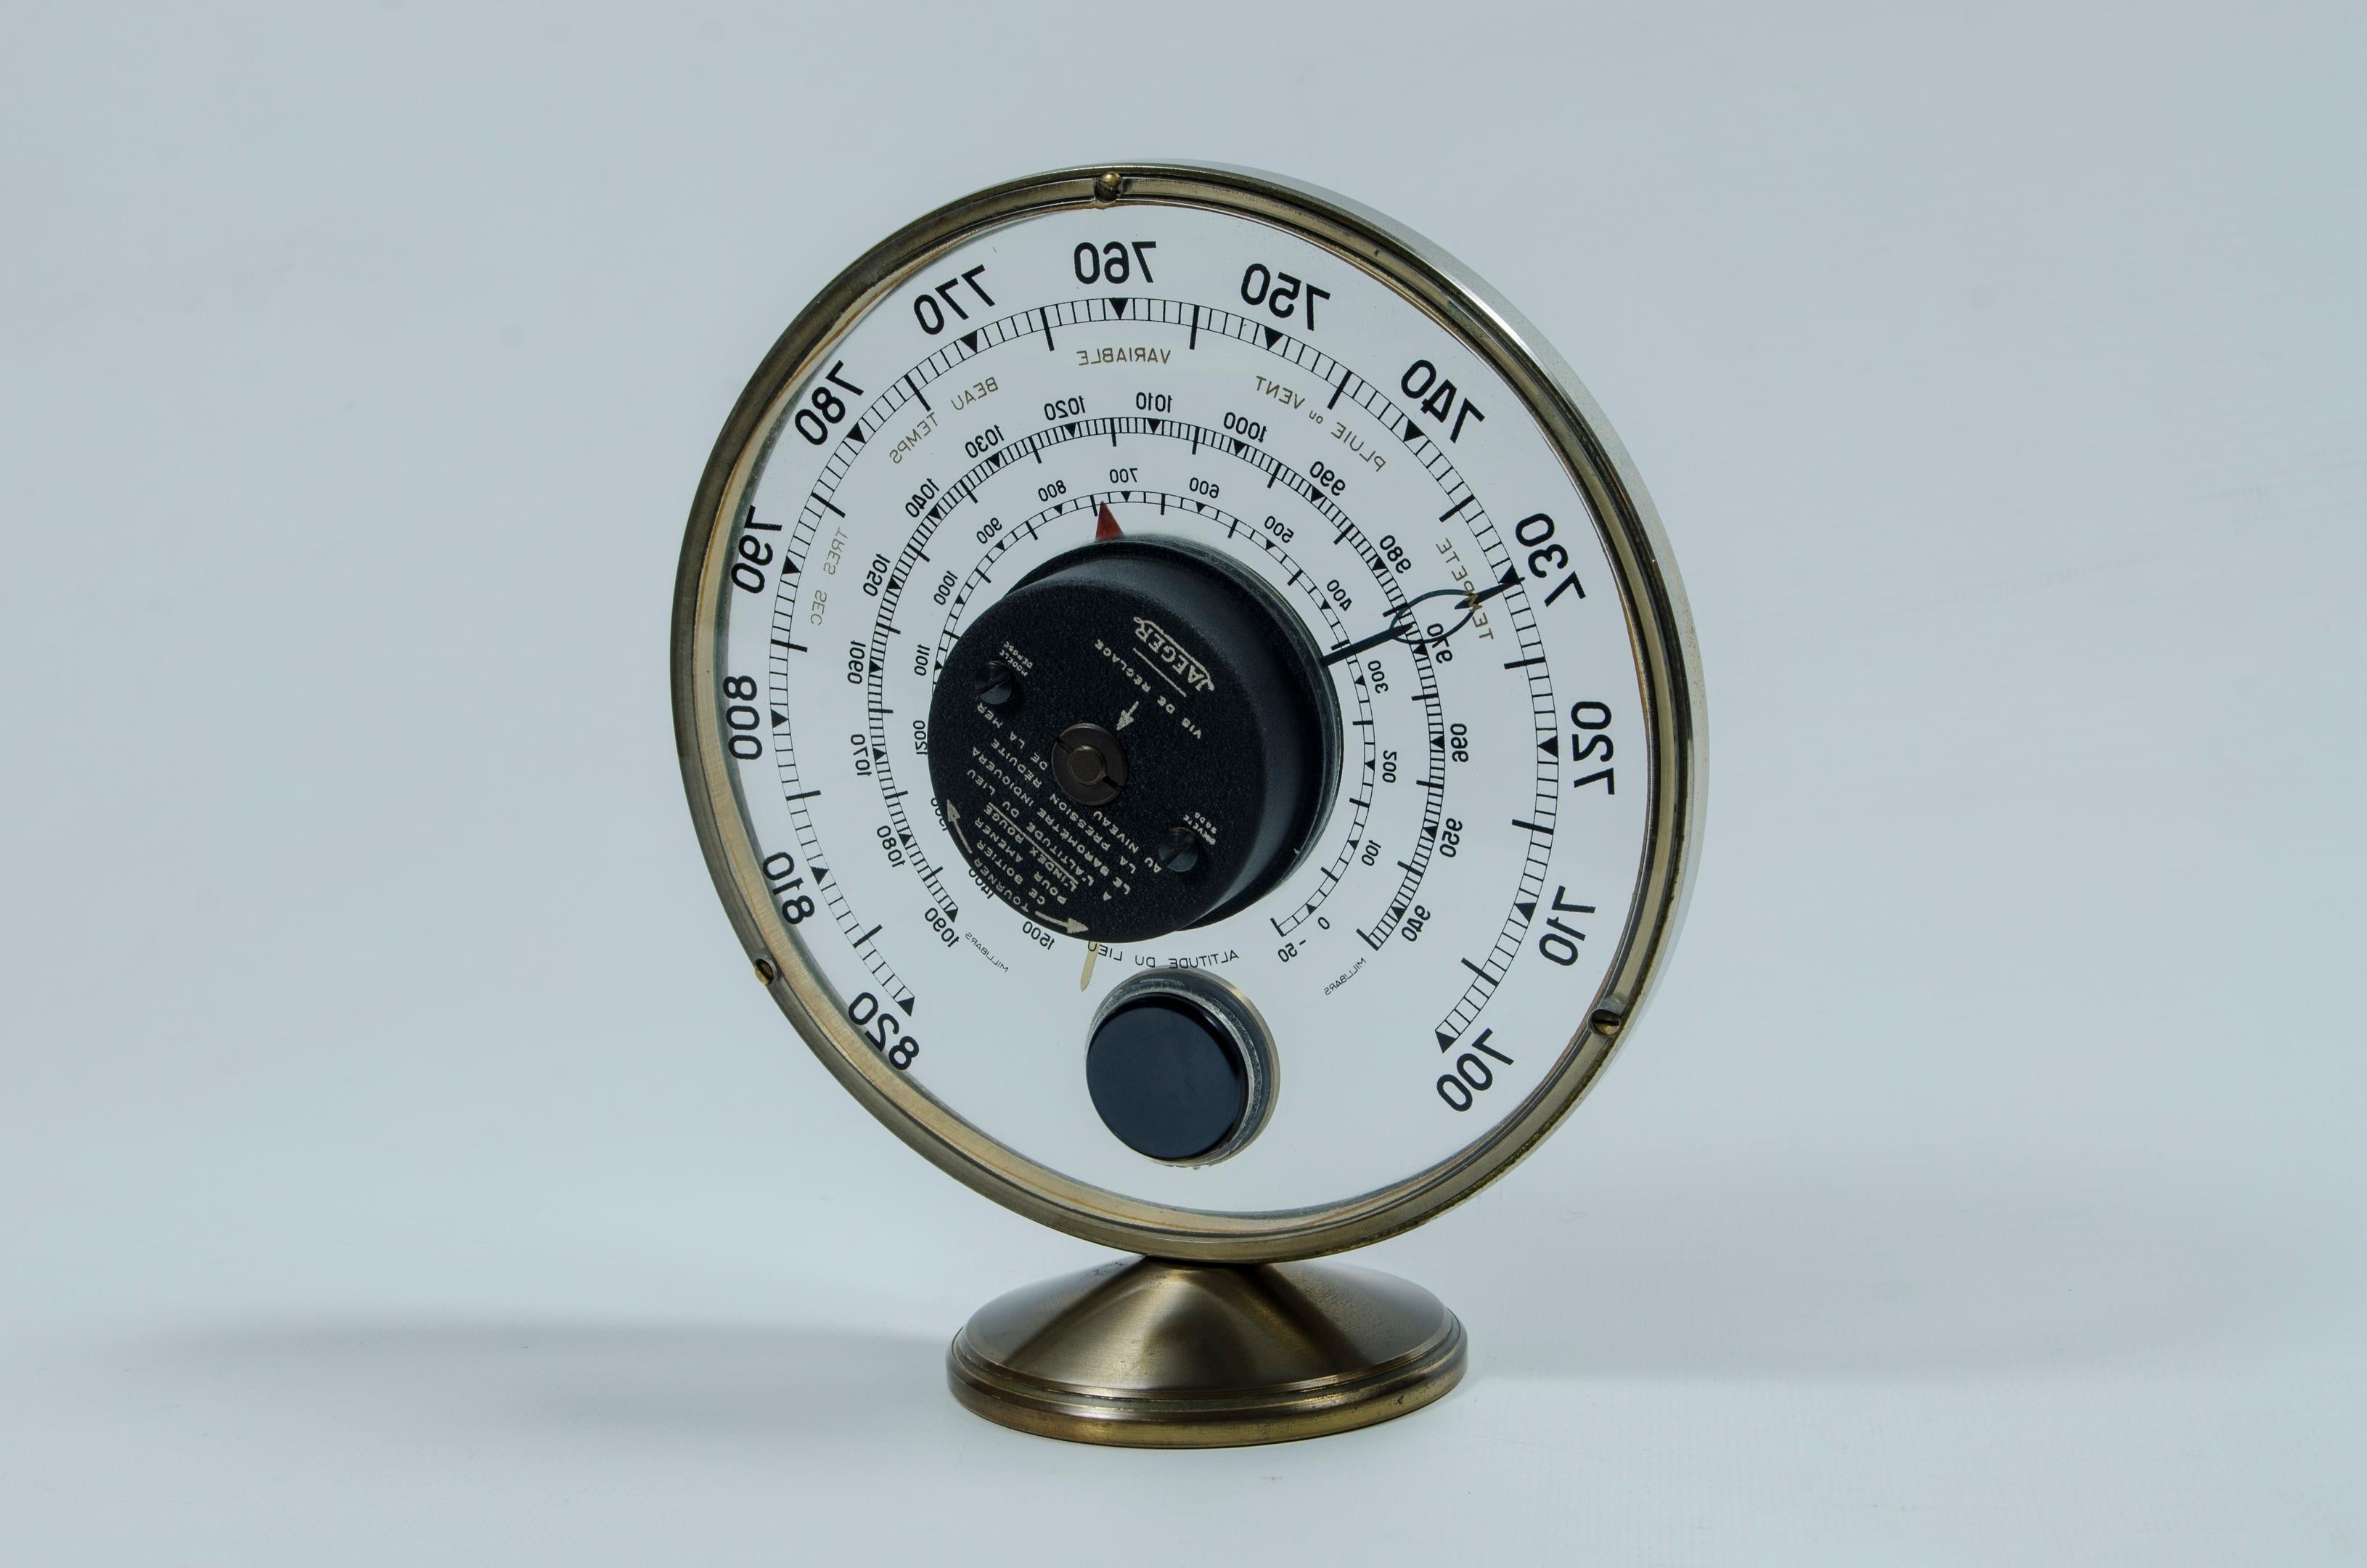 Barometer and thermometer Jaeger
circa 1950 table piece
French manufacture
perfect condition
- Working.